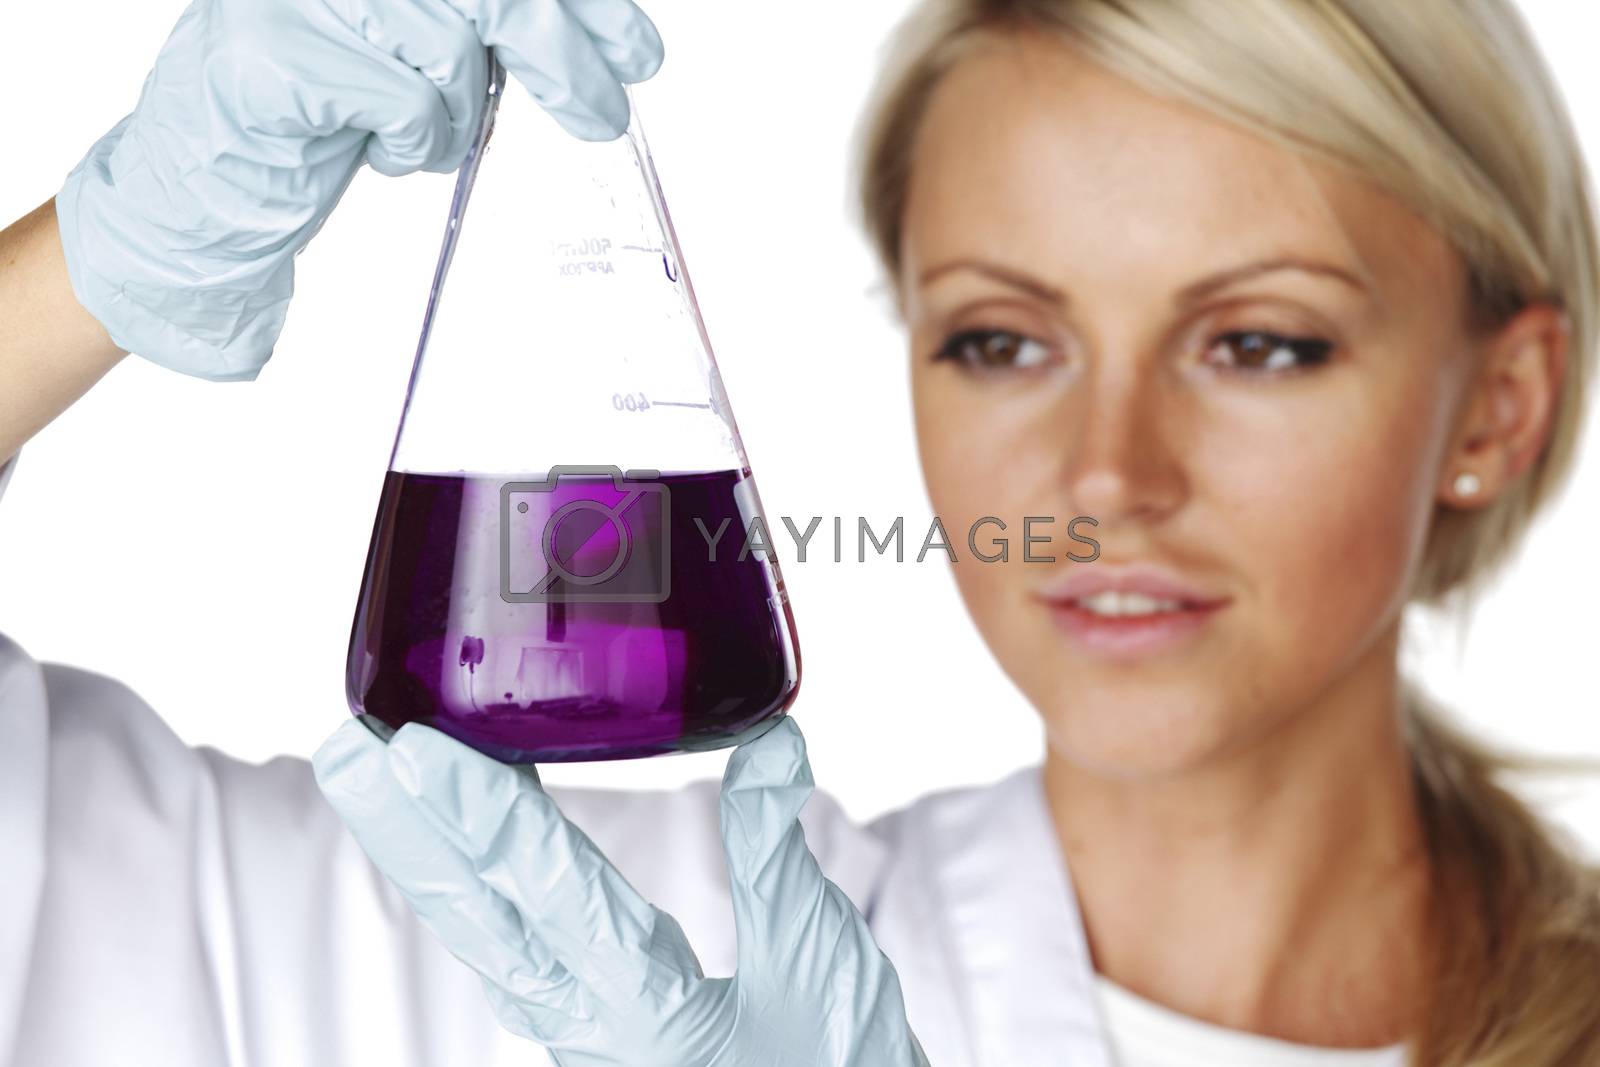 Royalty free image of chemical experiment by Yellowj